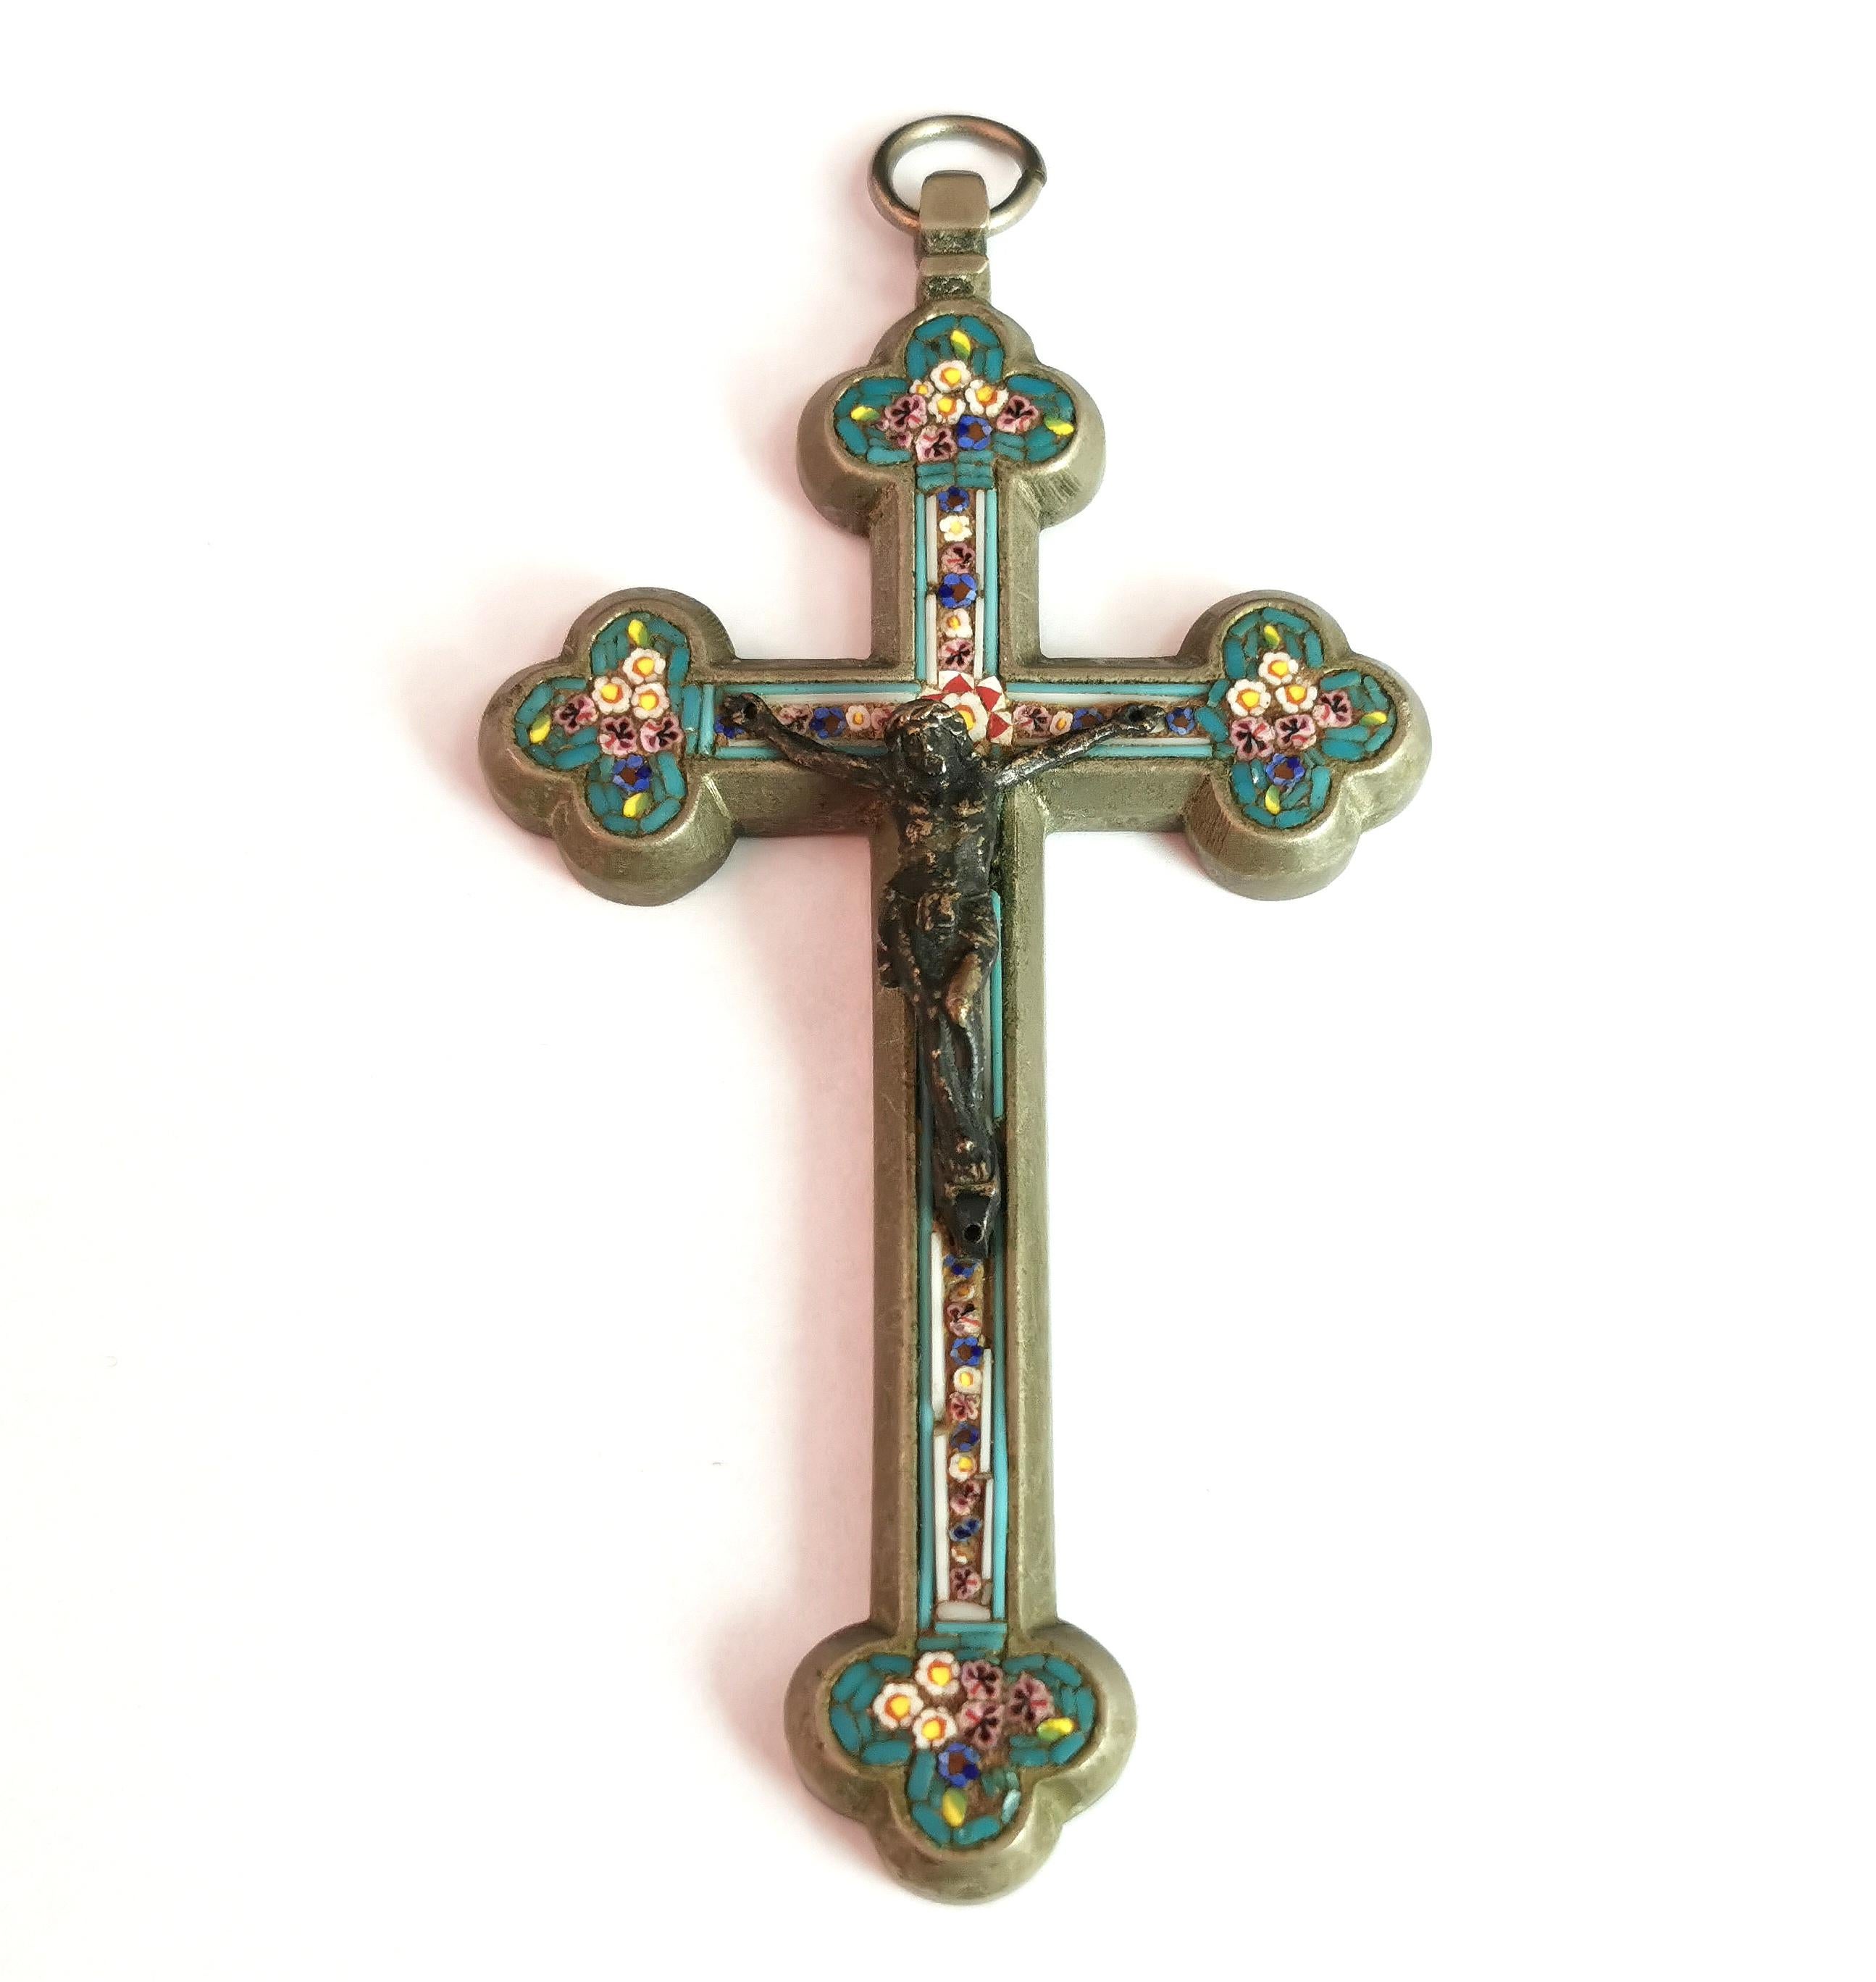 A truly magnificent antique, Italian Micro mosaic crucifix or Cross pendant.

The Cross has an ornate rounded shape and the pretty Tesserae displaying a blue / green ground with multiple floral displays.

The Cross features jesus to the centre in